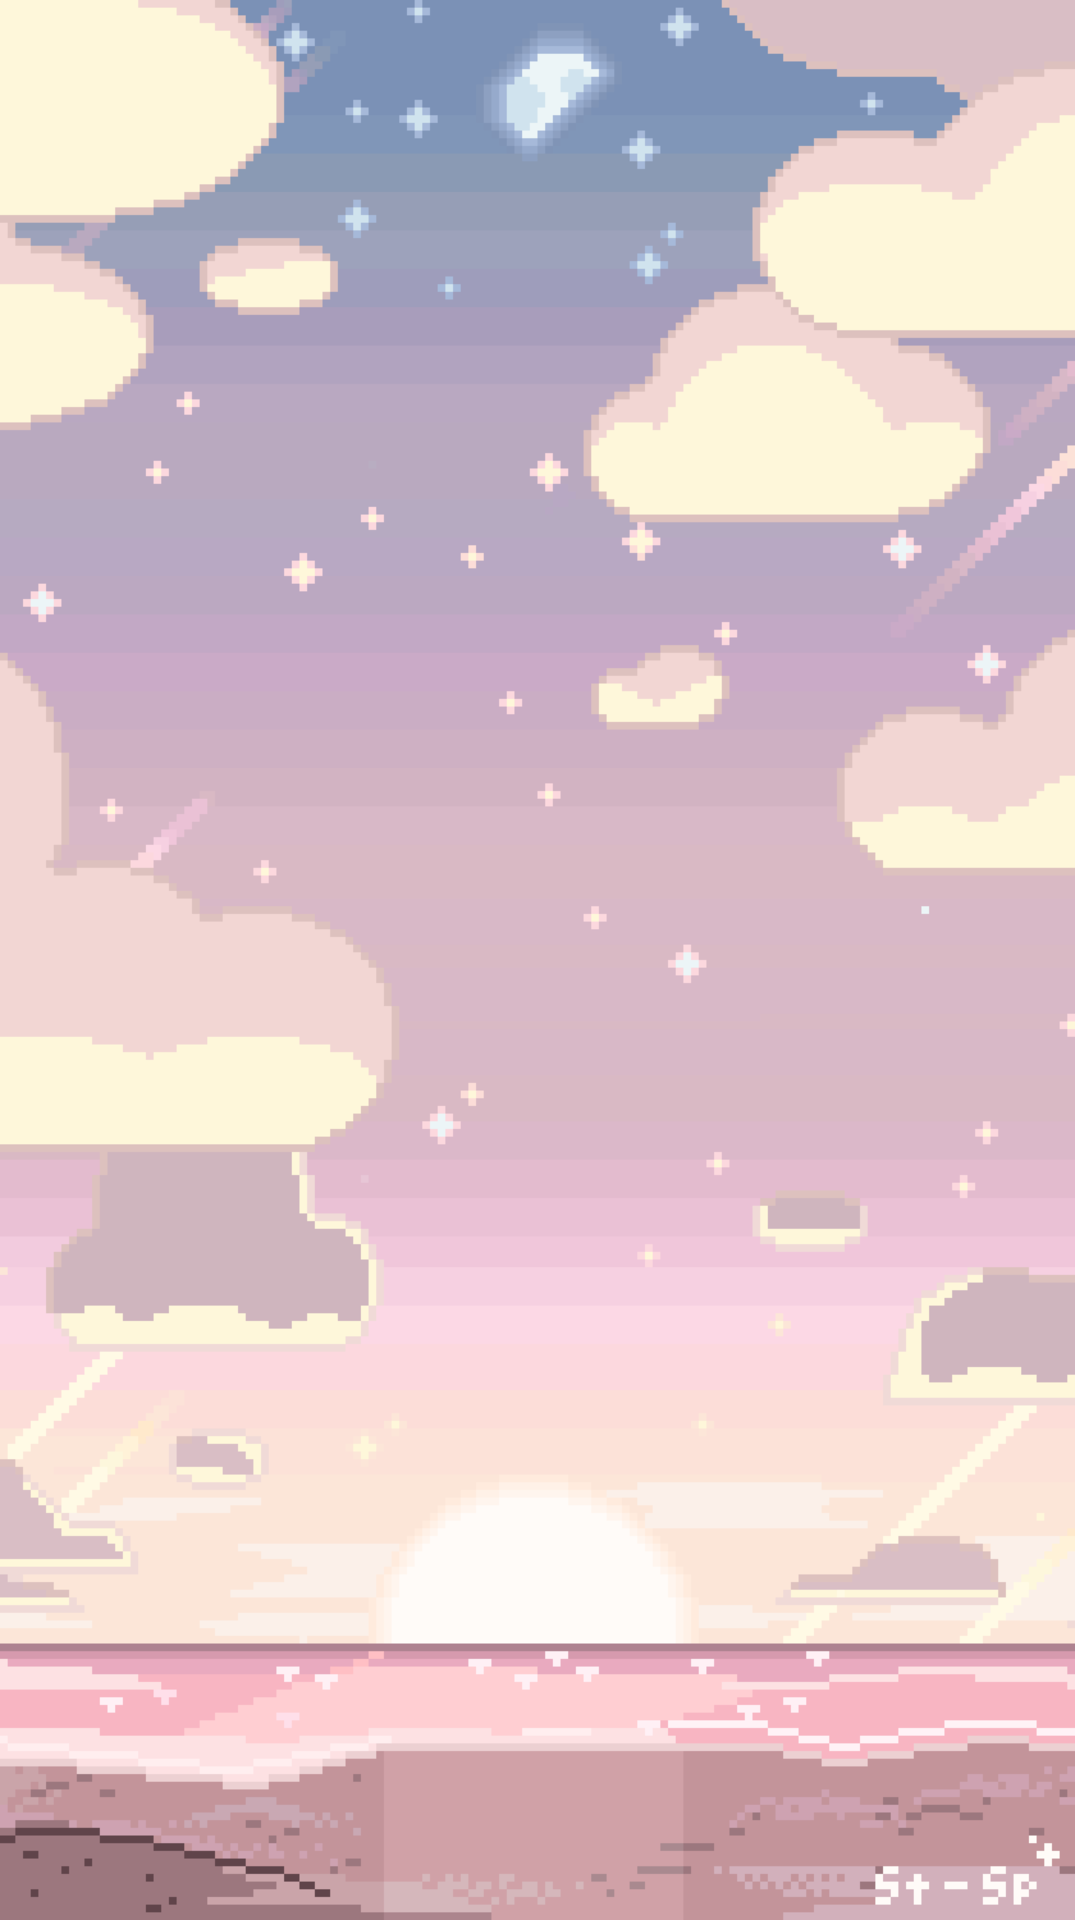 Some high quality iPhone wallpaper of Steven Universe scenery I’ve made in my pixel art style! Free to use. Do not delete caption or repost.